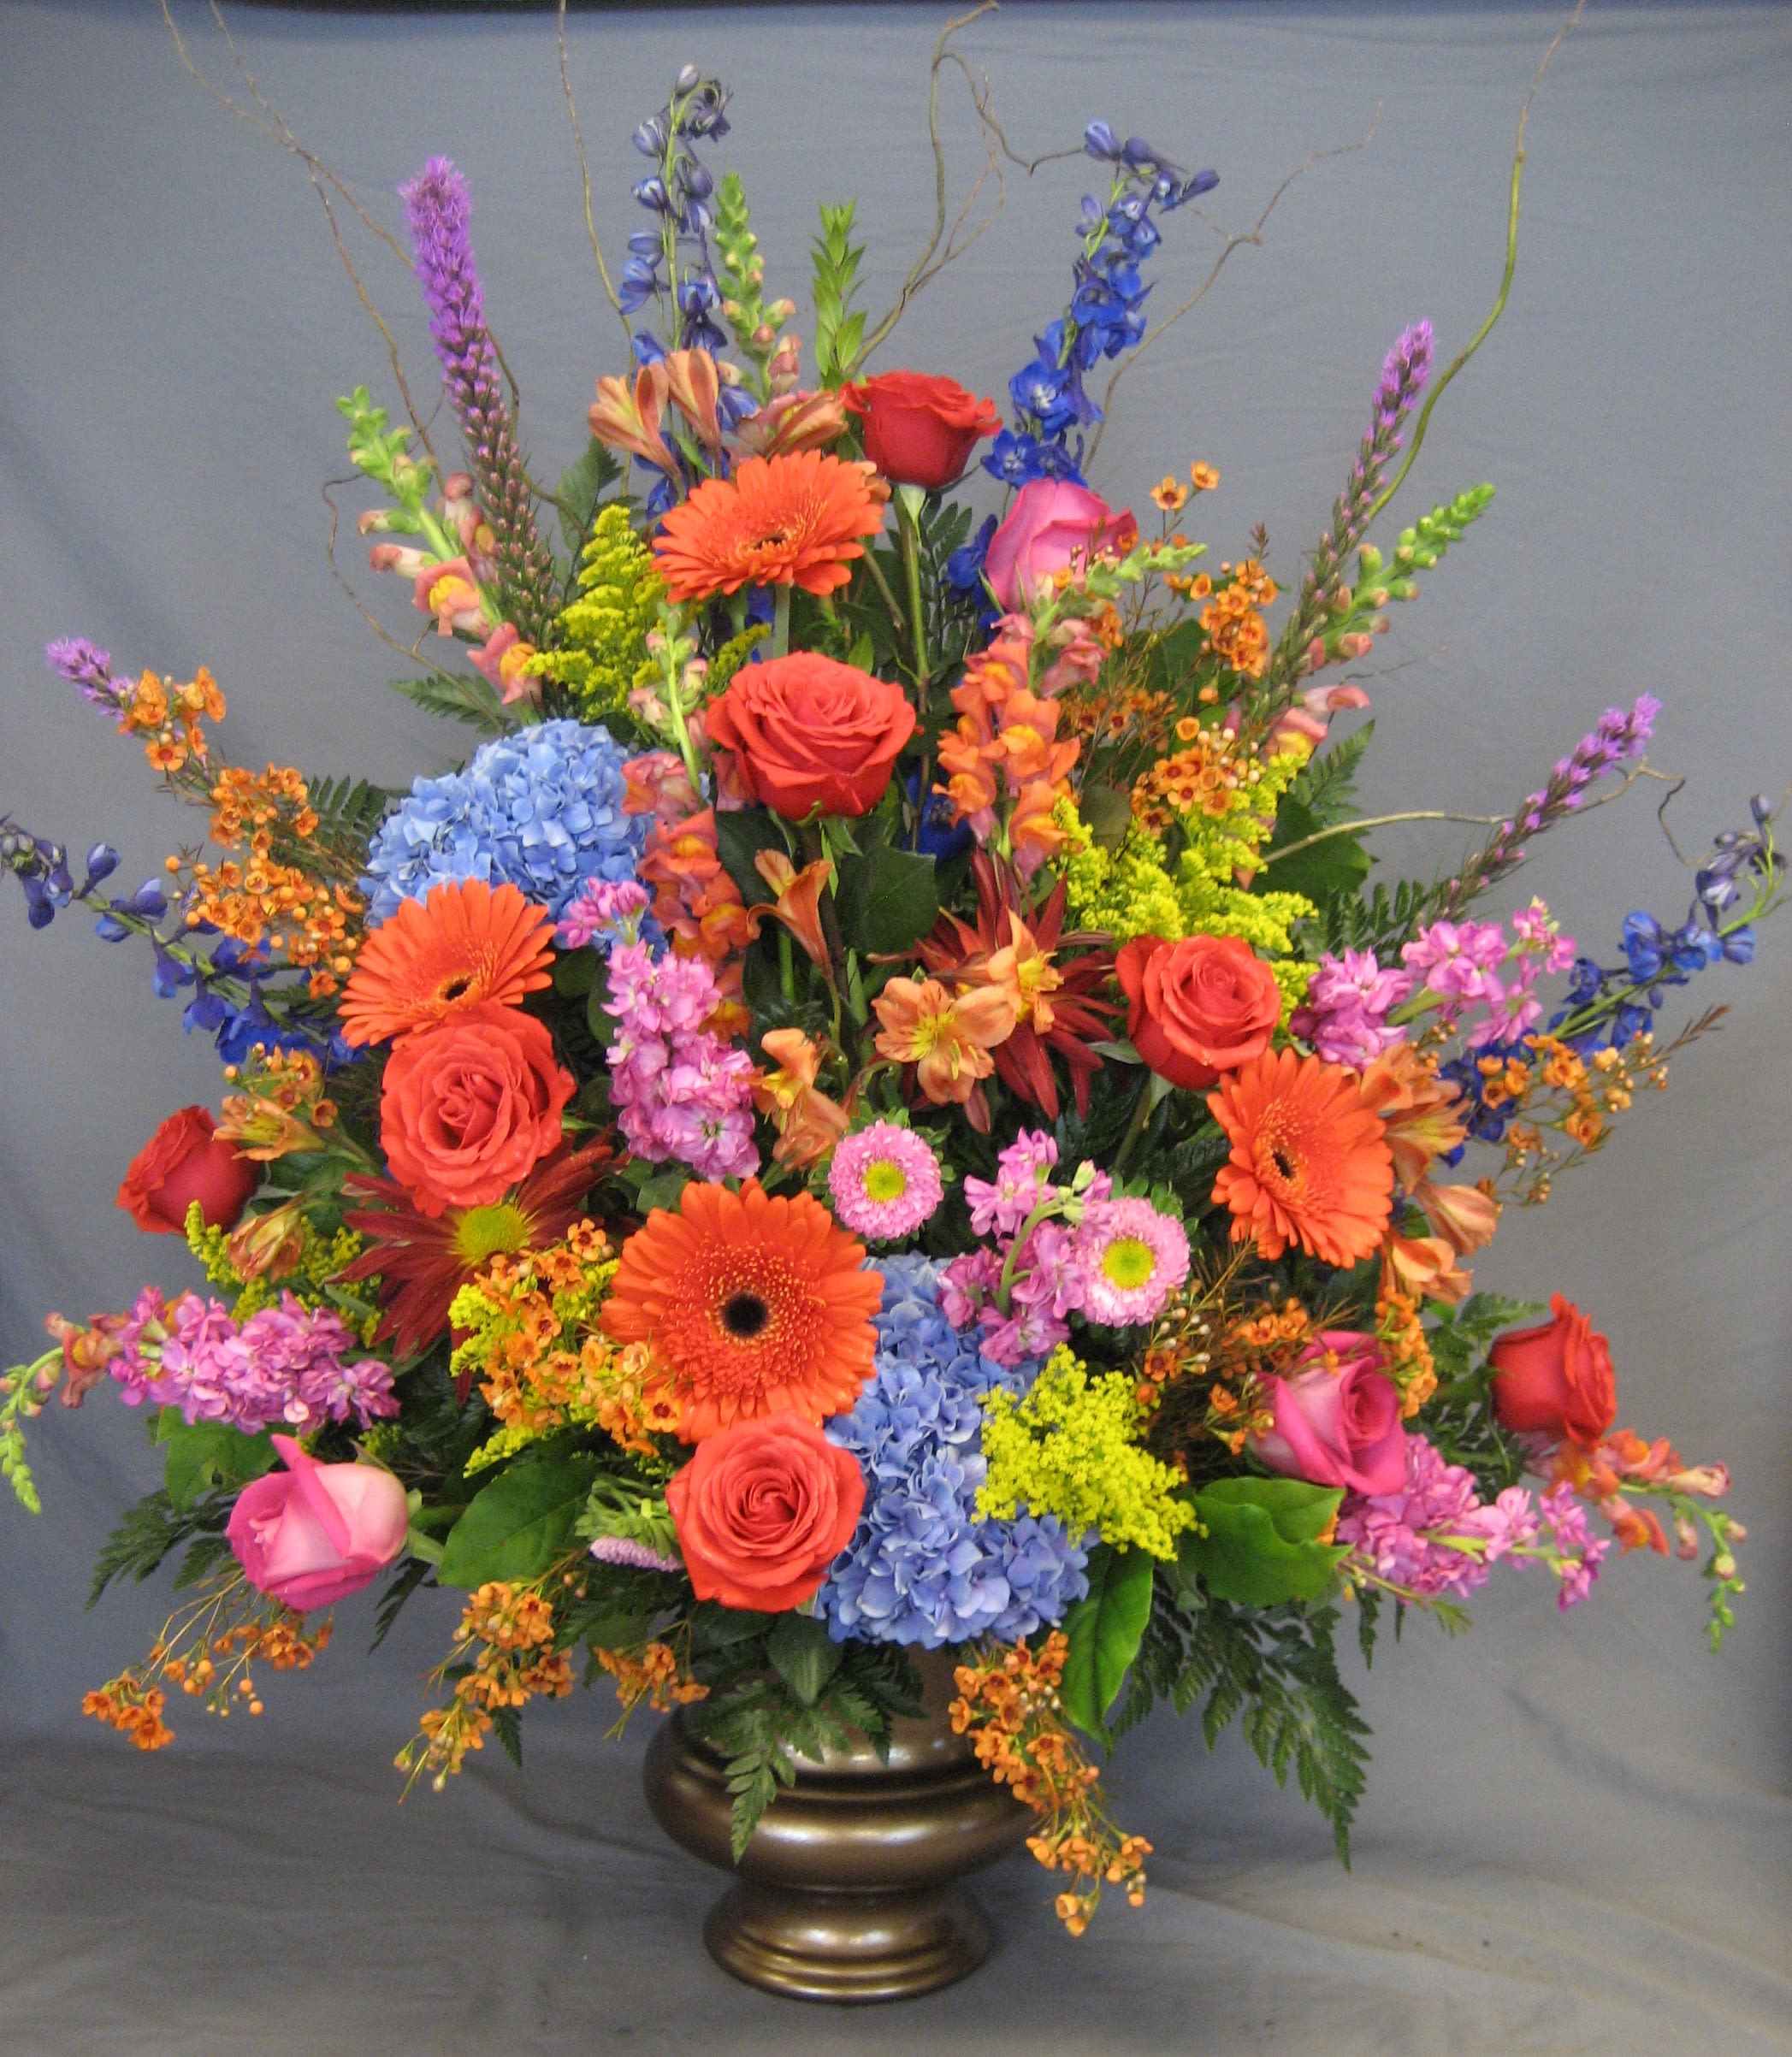 Bold Garden Mache M22 - Uplifting and heartwarming. This bold display of gerber daisies, hydrangea, roses, delphinium, asters and more are arranged expertly in a warm copper urn.